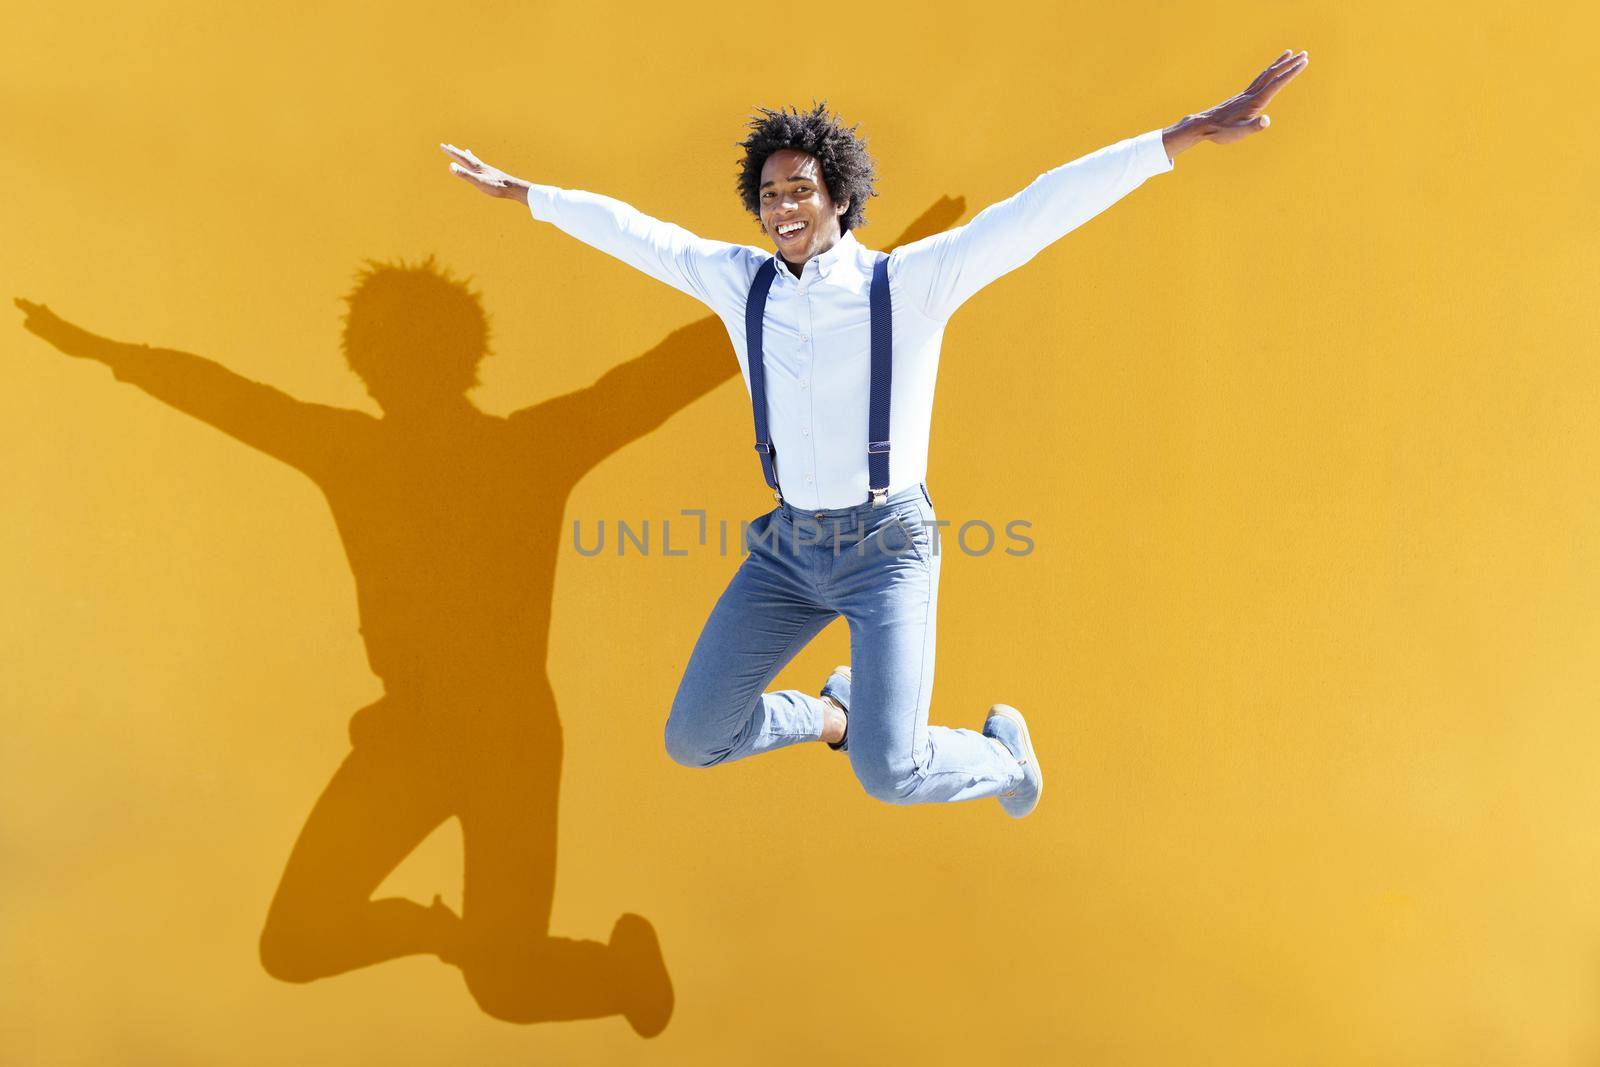 Black man with afro hair jumping on a yellow urban background by javiindy